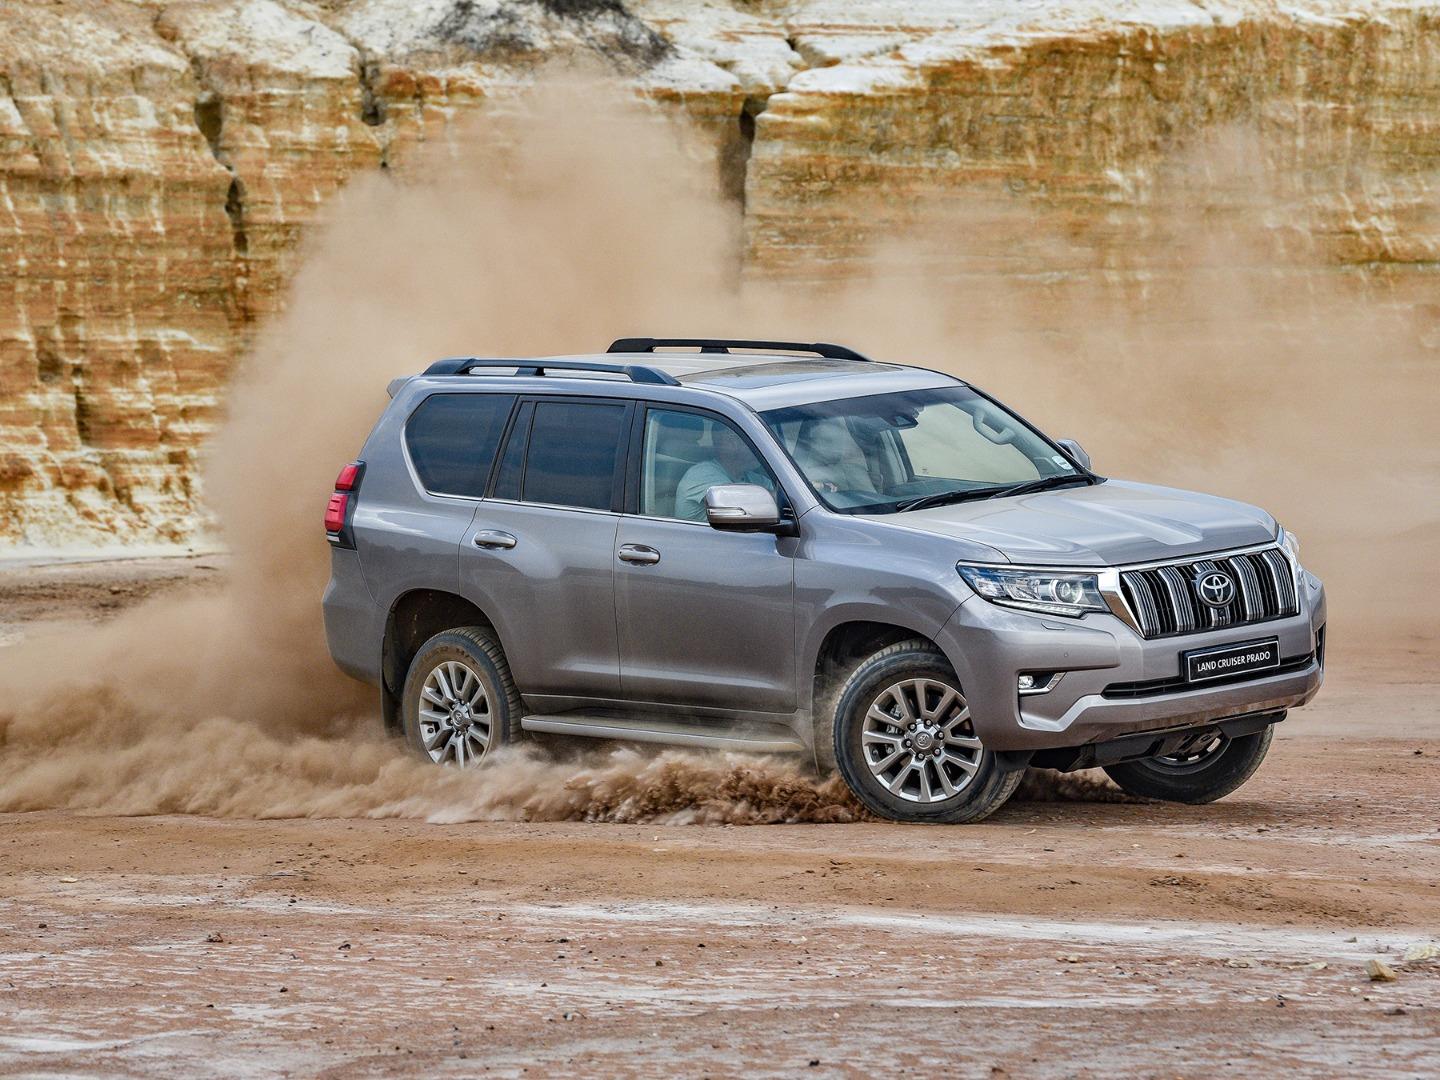 we compared toyota land cruiser prado engines, and the efficiency crown goes to…